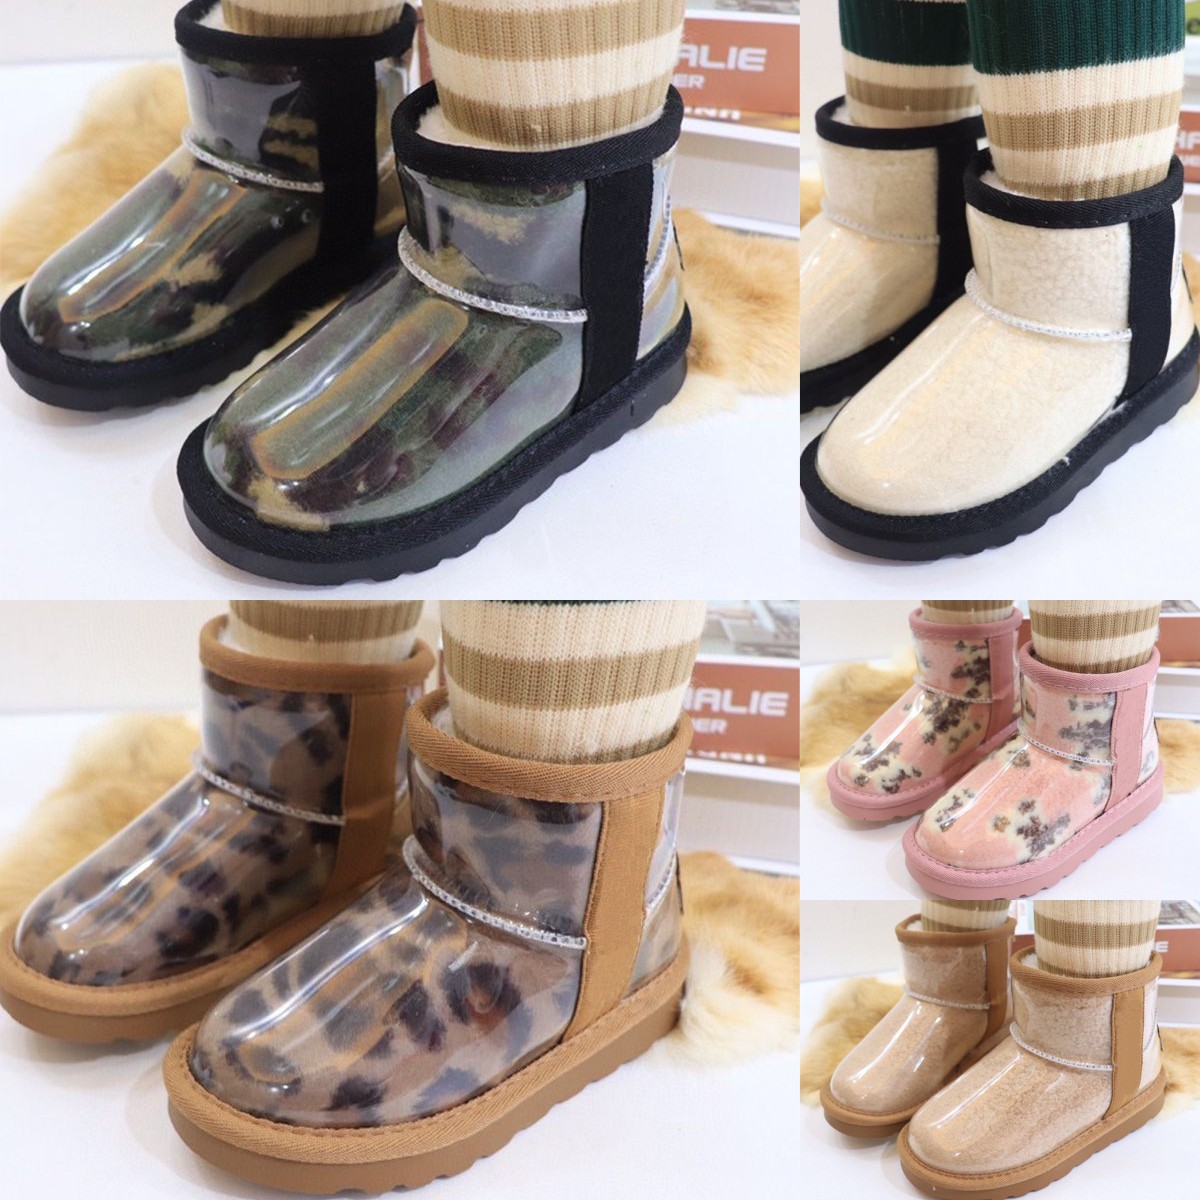 

2022 Australia girls Classic baby designer uggly boots kids shoes youth Jelly Snow boot toddler wggs children infants uggitys kid shoe winter warm snow sneaker